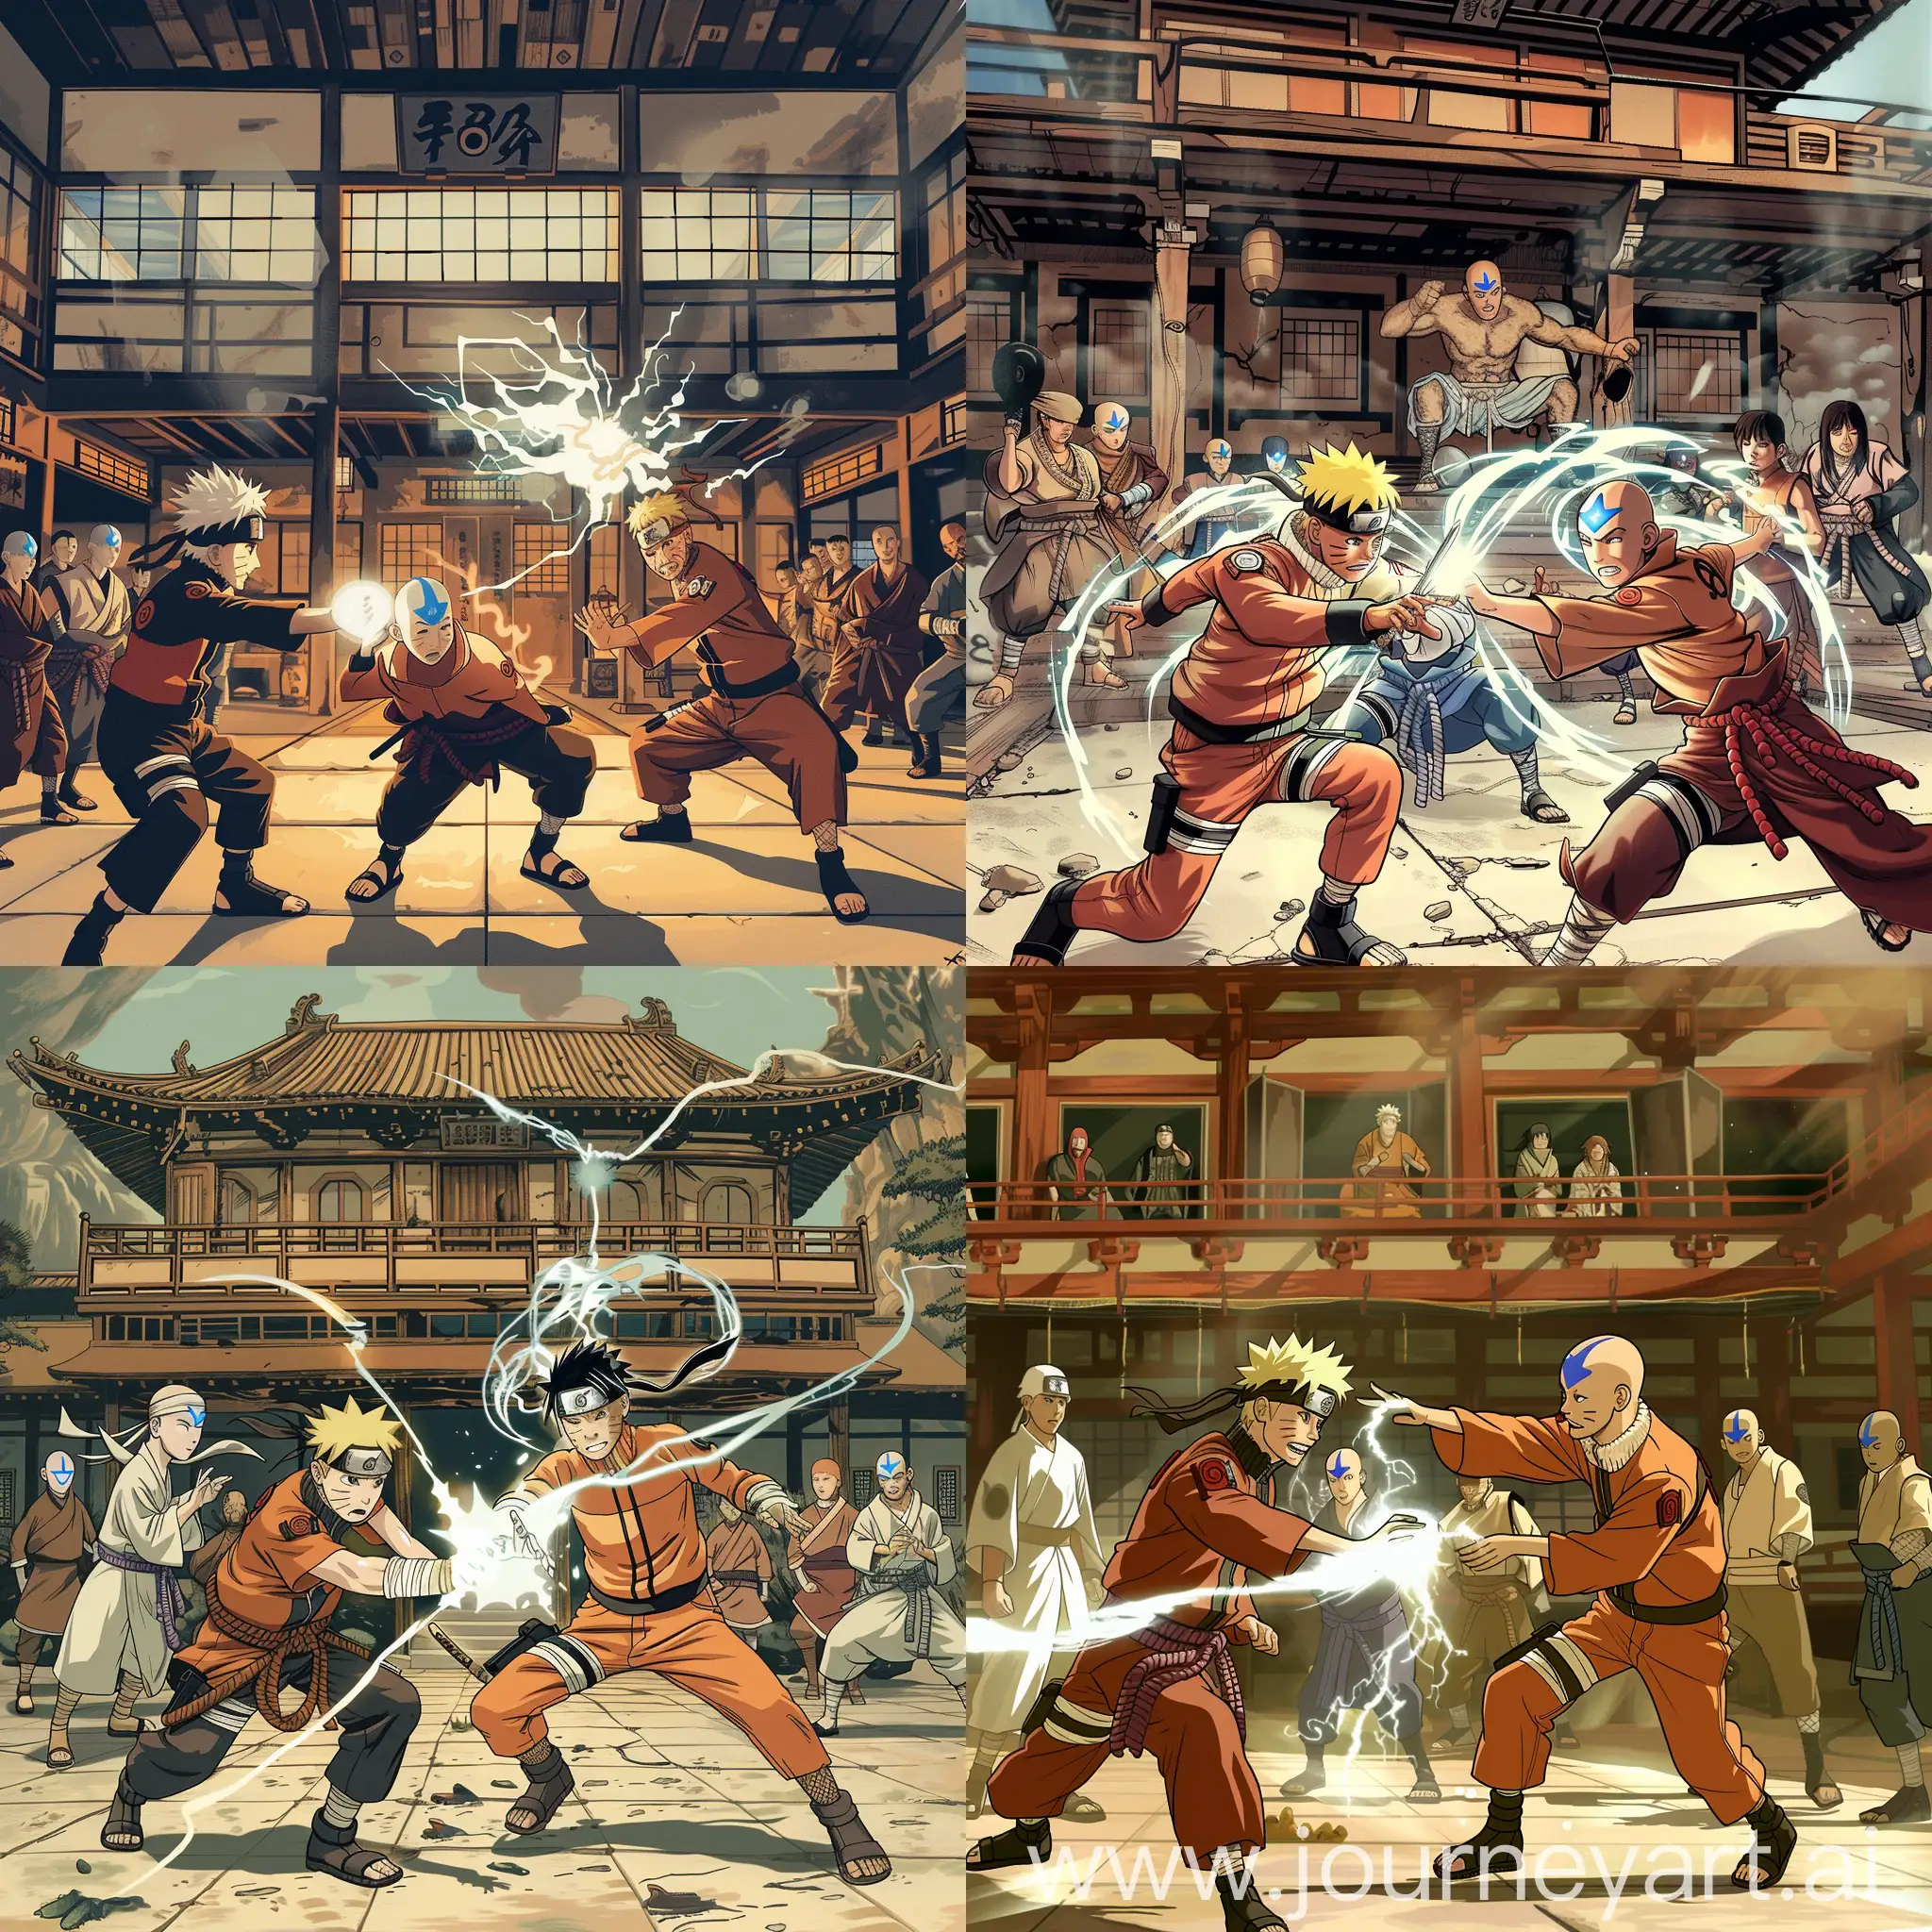 Naruto is fighting against Aang of the last Airbender, both are casting white magic spells, other characters are watching them, before a Japanese dojo